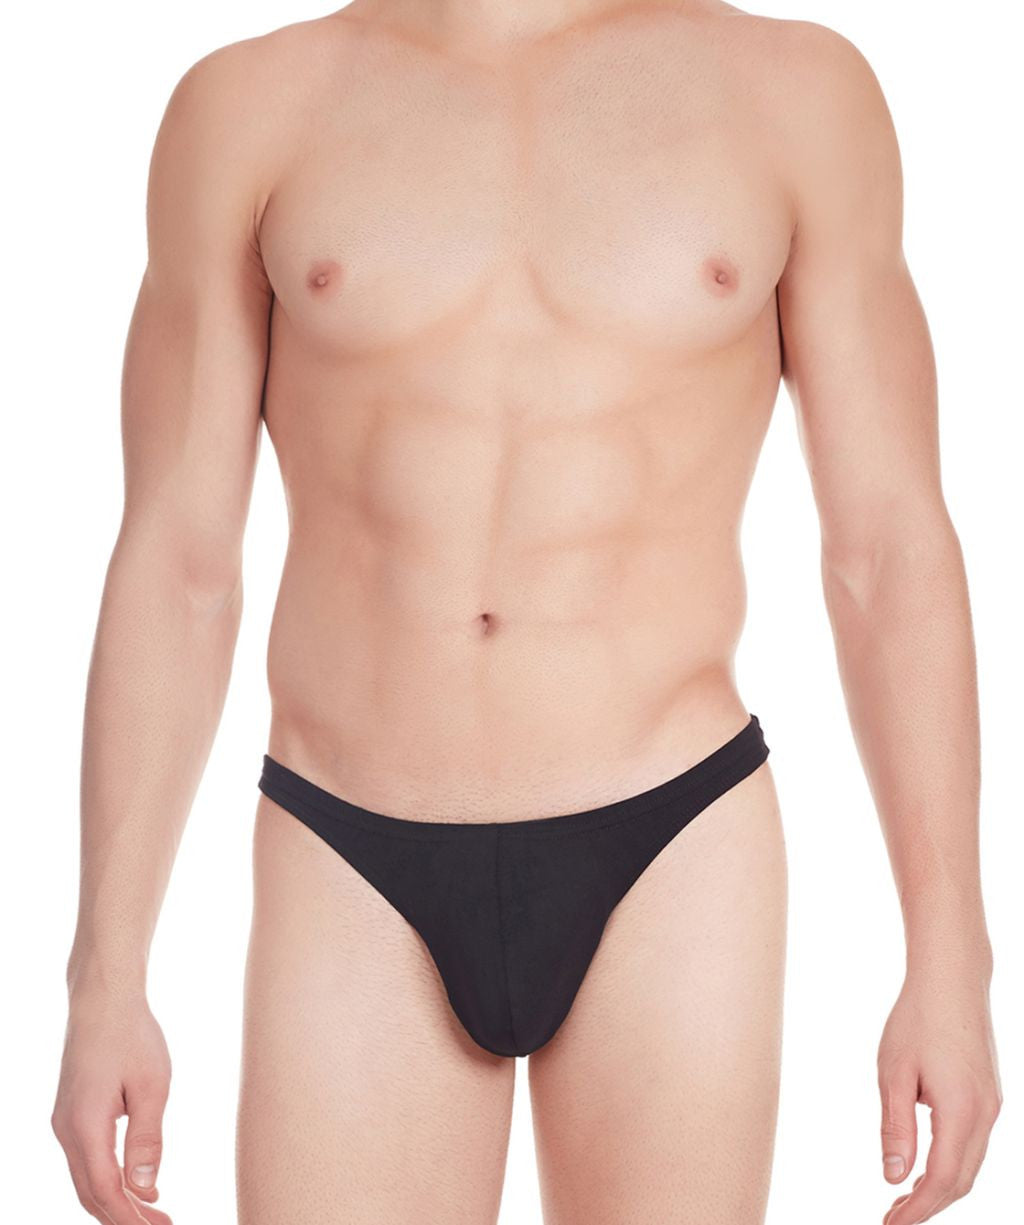 Buy Cotton Thongs Online In India -  India